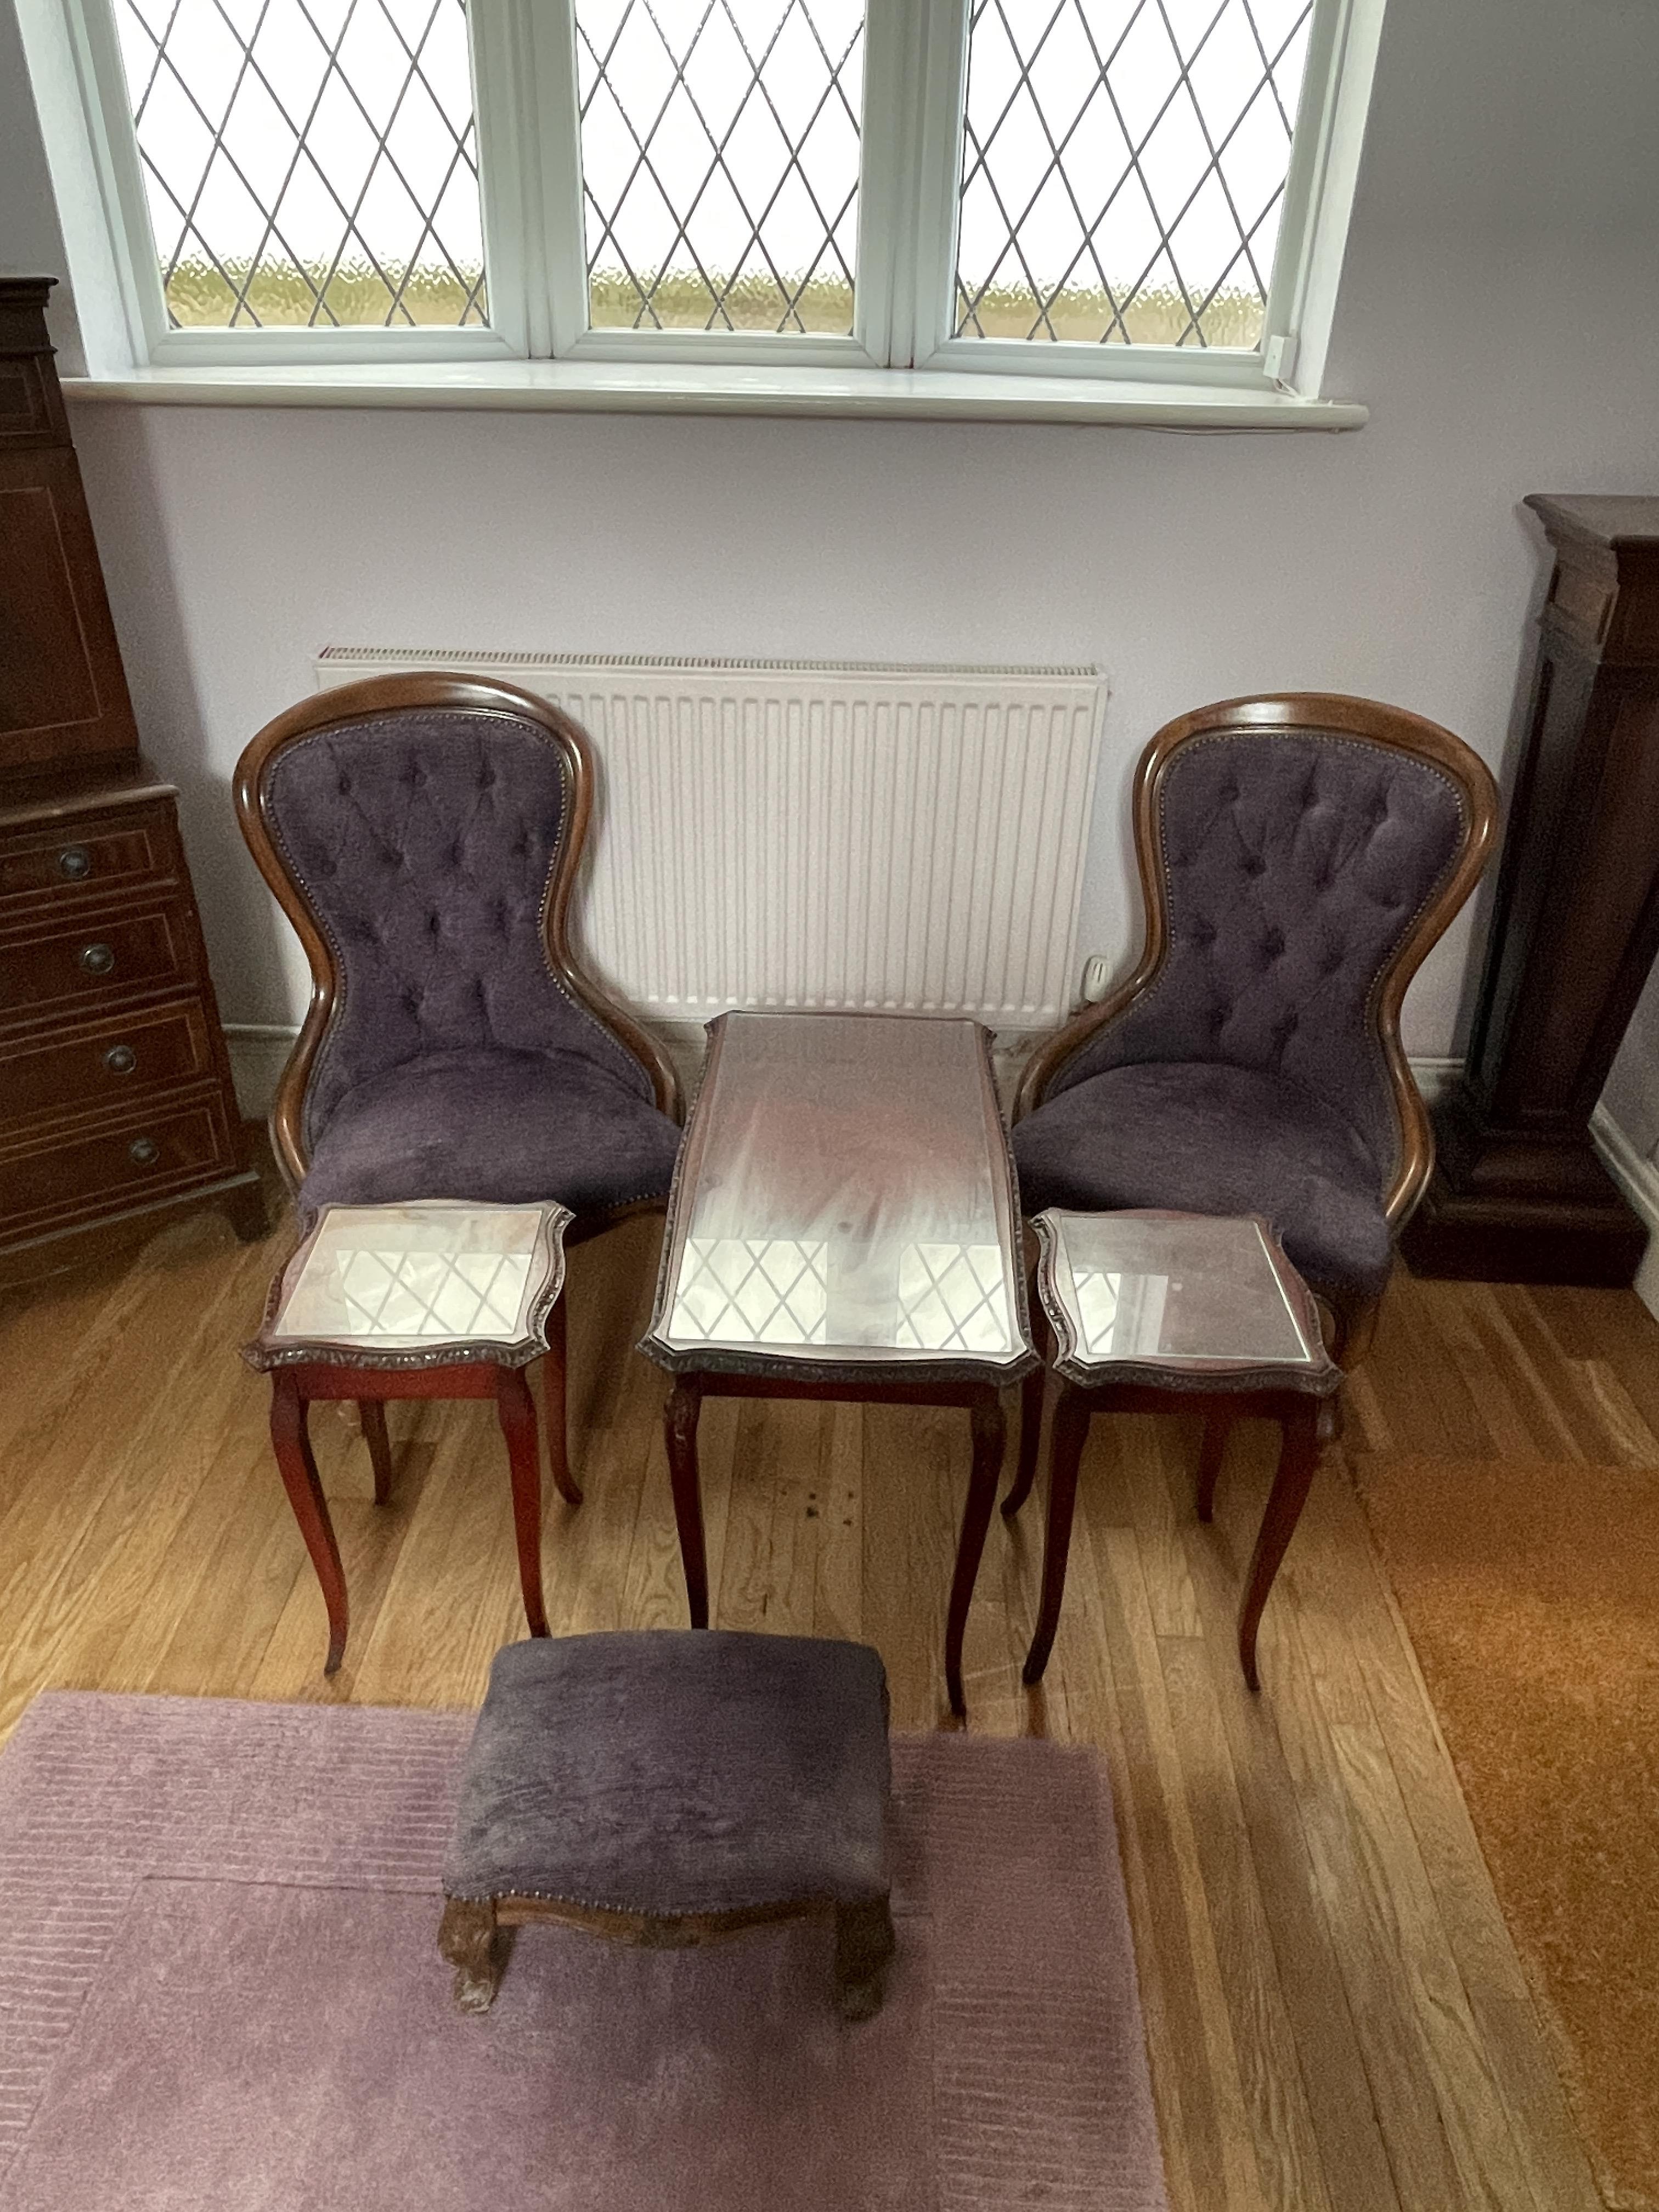 Pair of Nursing Chairs with Foot Stool along with